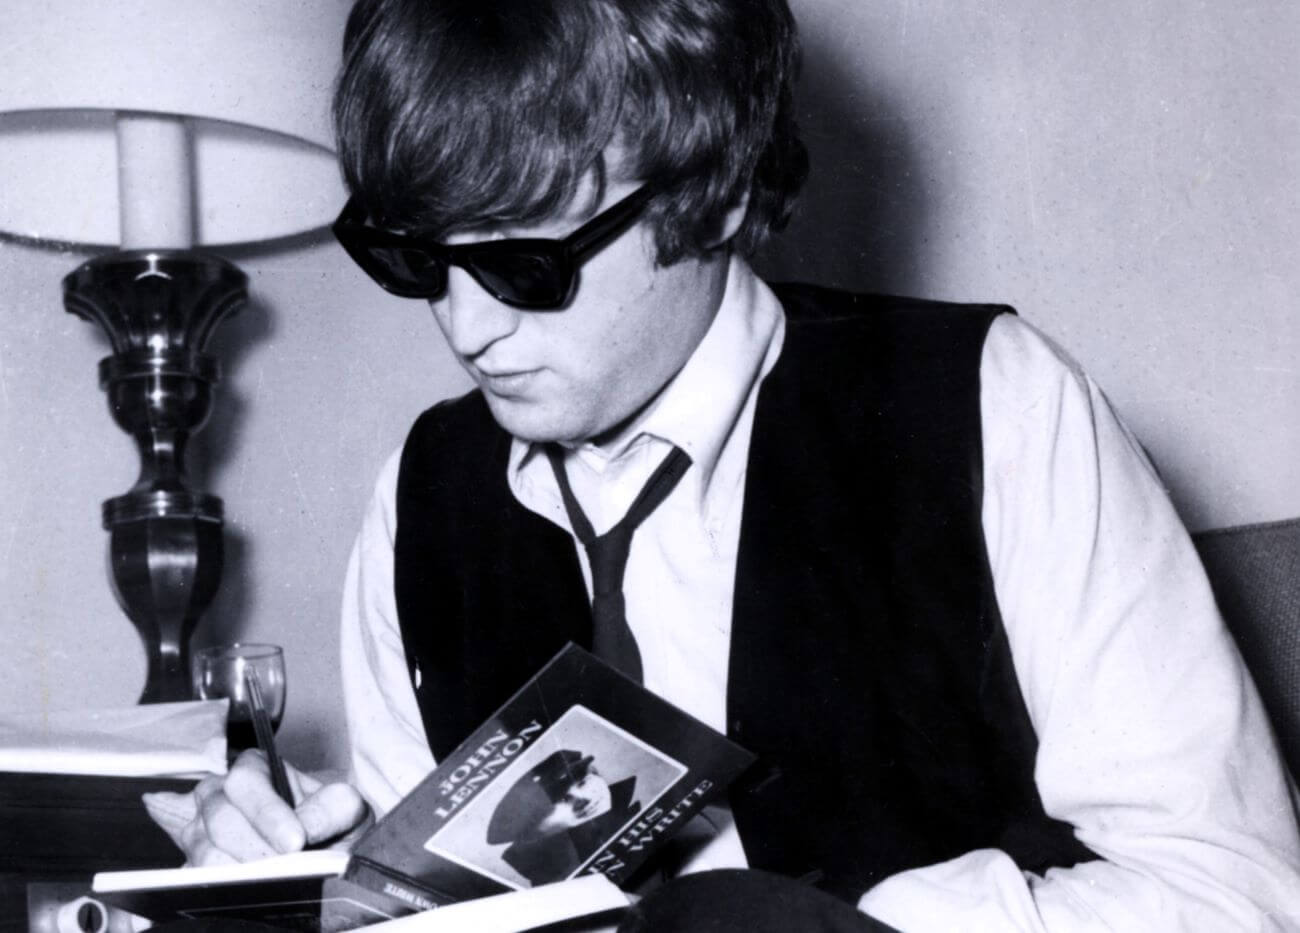 A black and white picture of John Lennon wearing sunglasses and signing a copy of his book "In His Own Write."